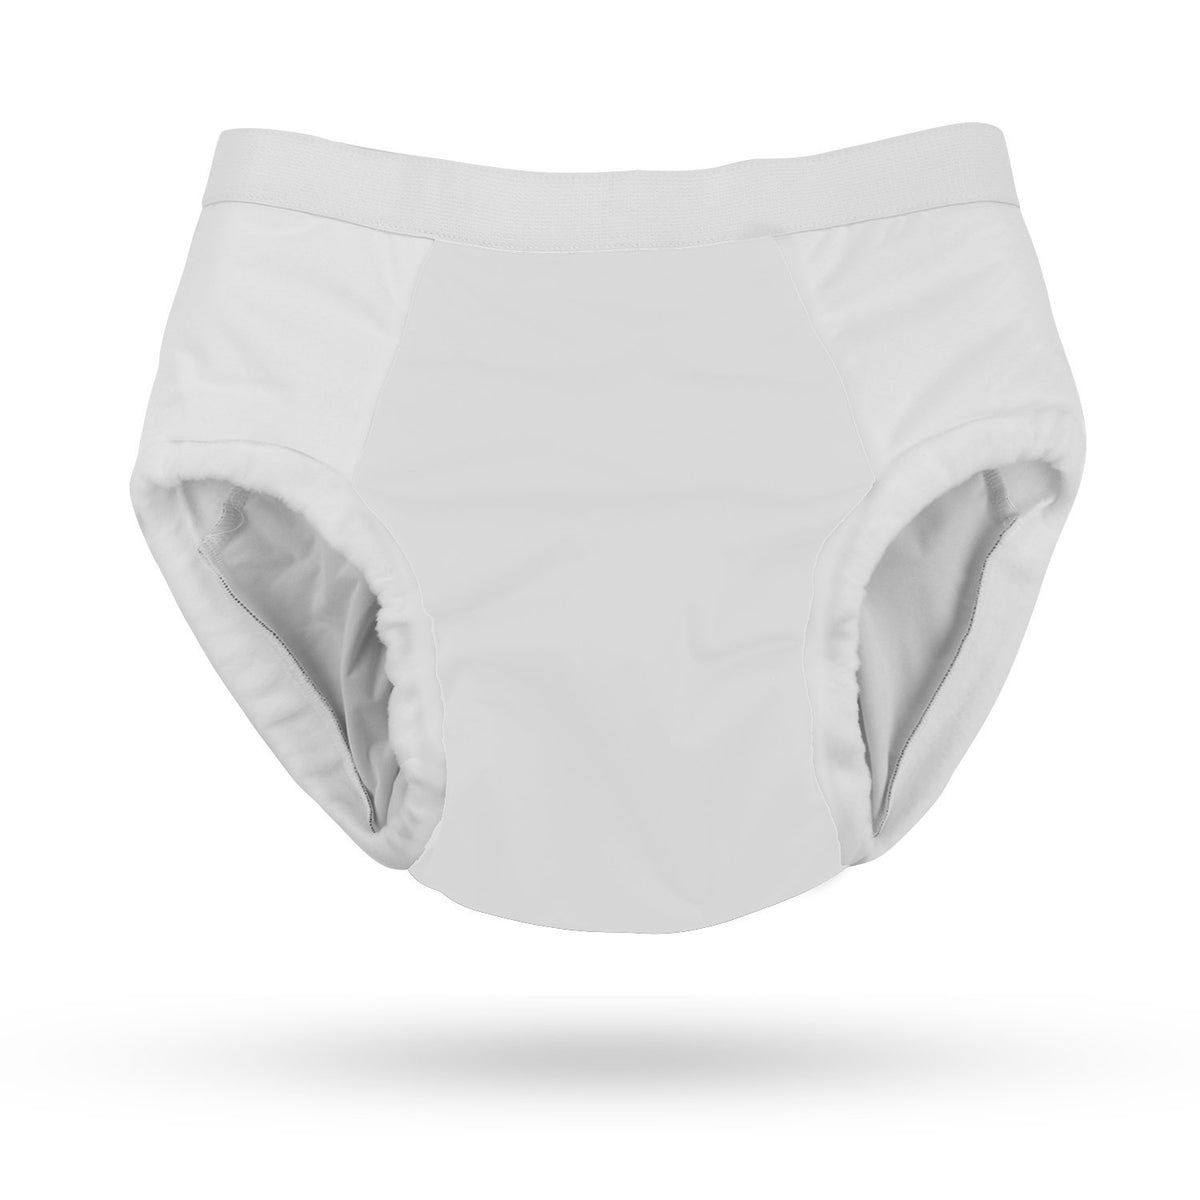 Washable Diapers For Incontinence